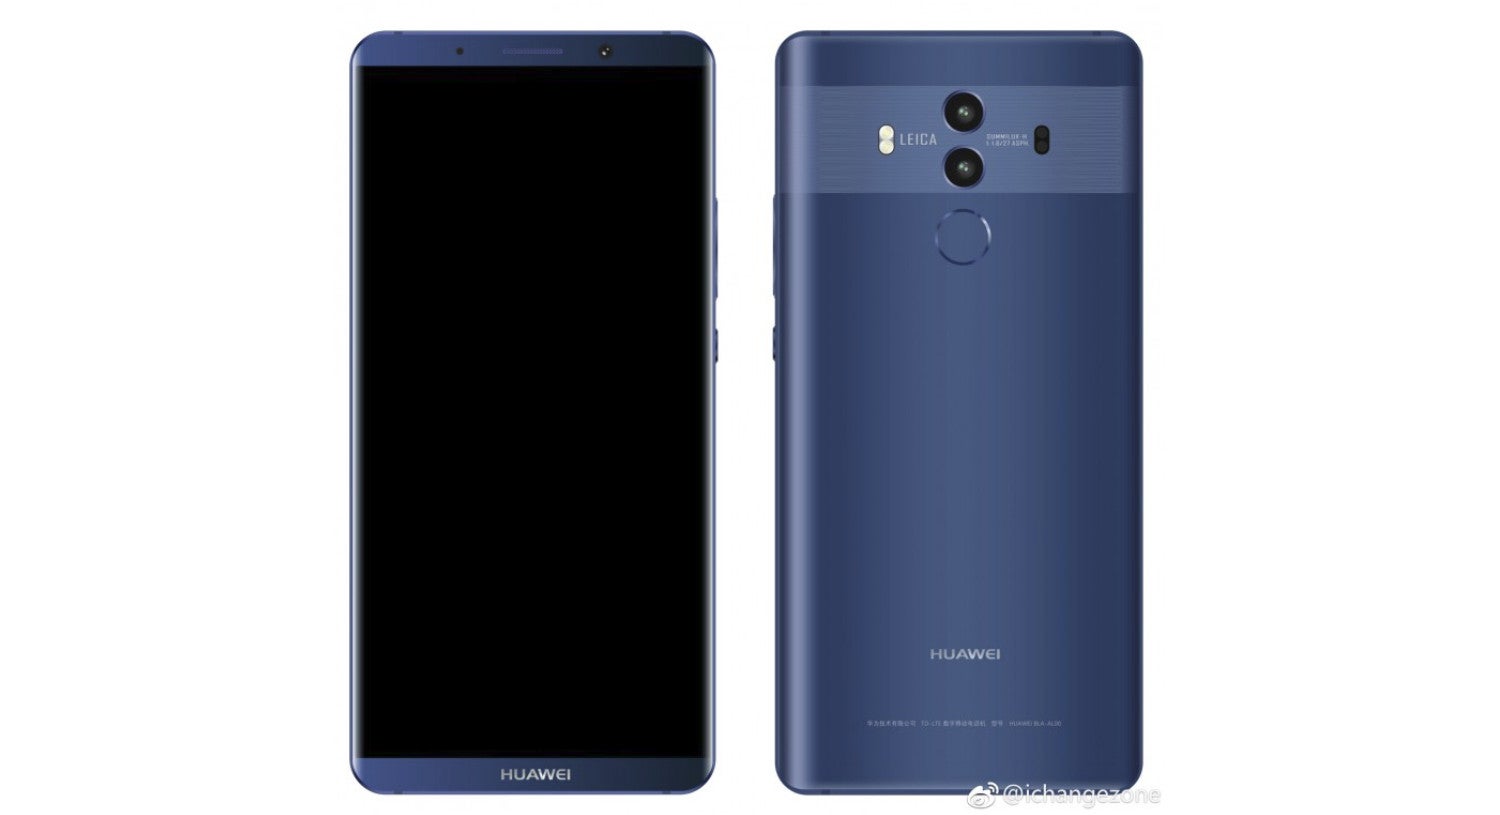 Here are a couple of more Huawei Mate 10 Pro renders before the October 16 announcement